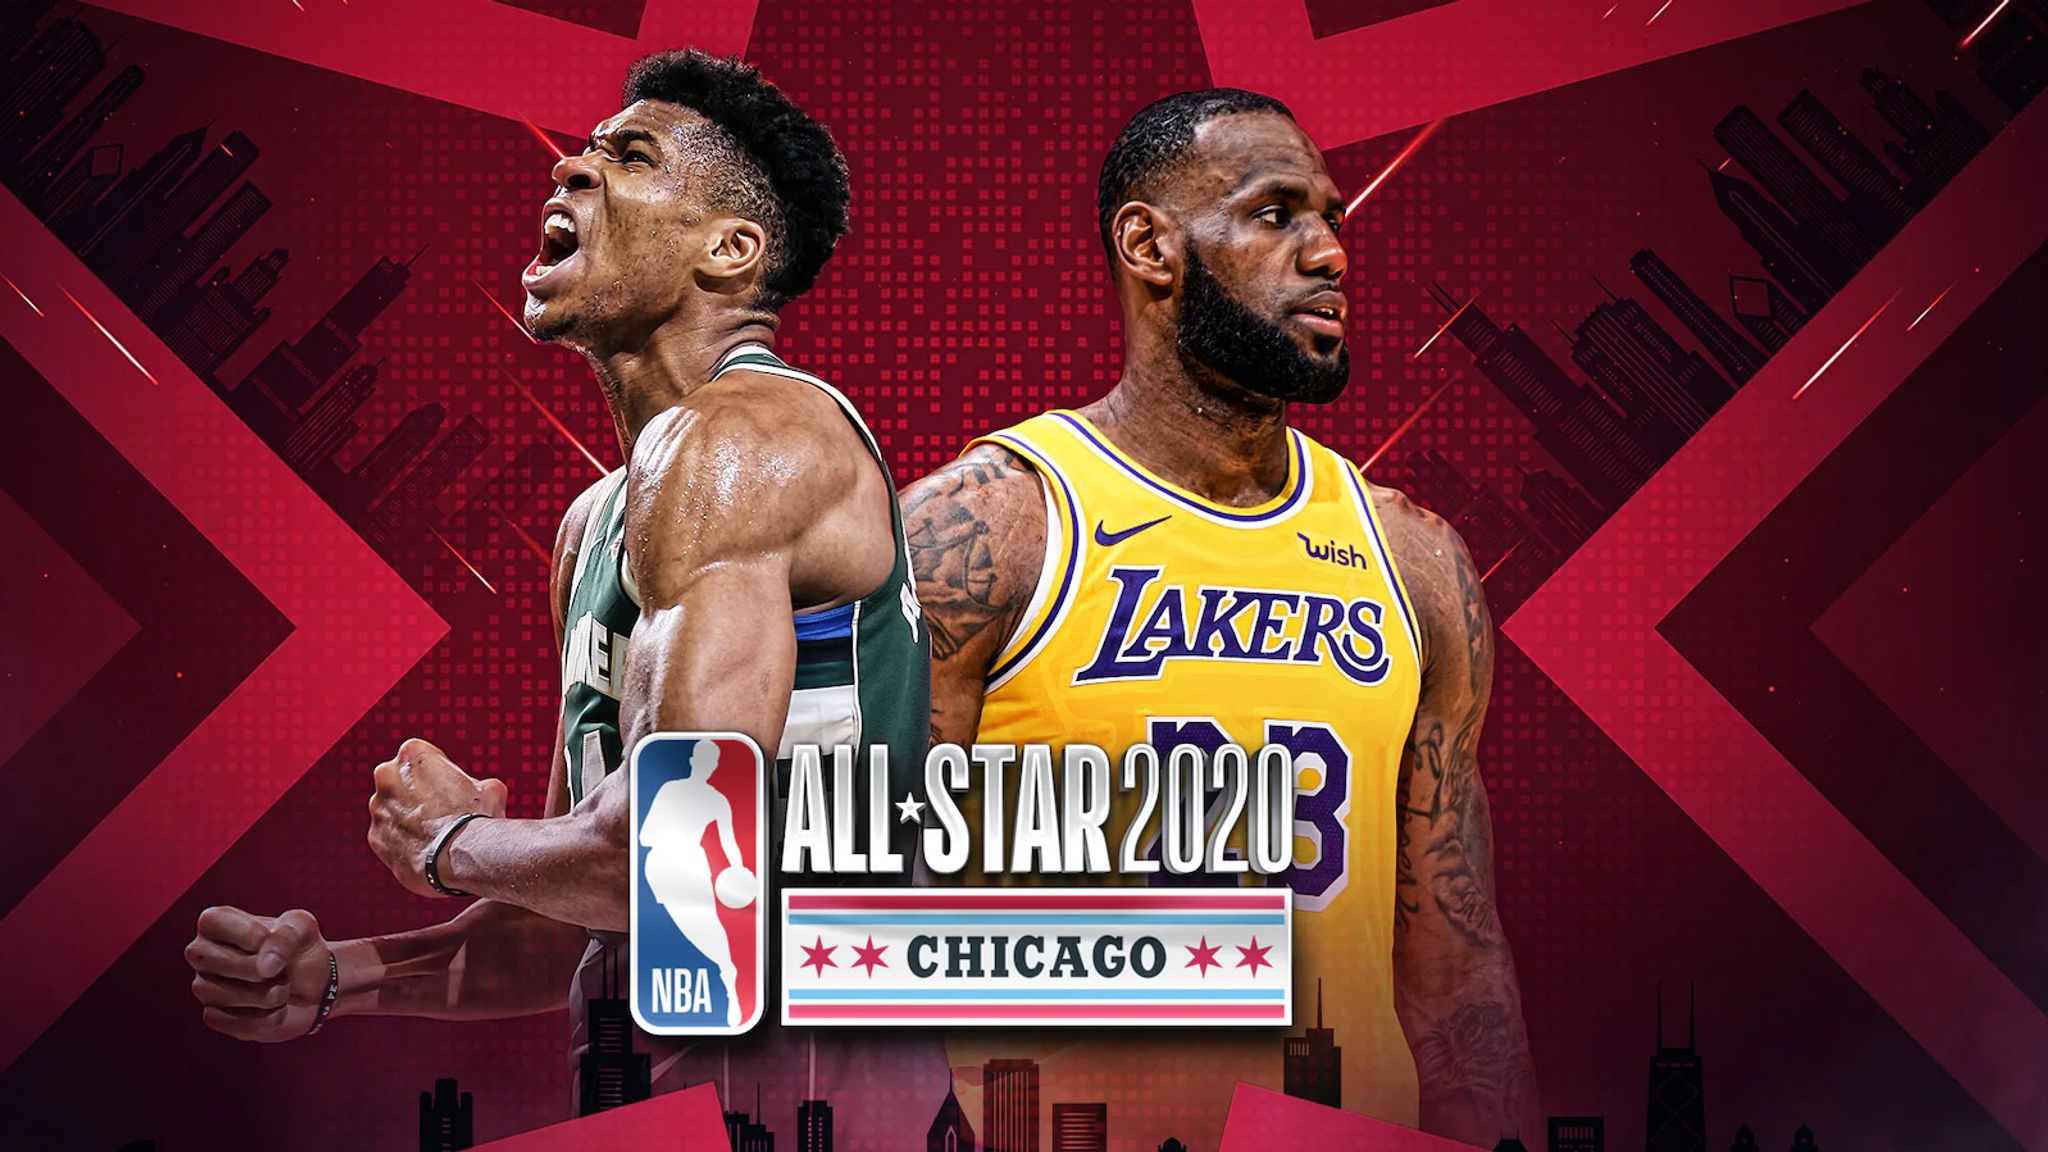 All-Star Game 2020